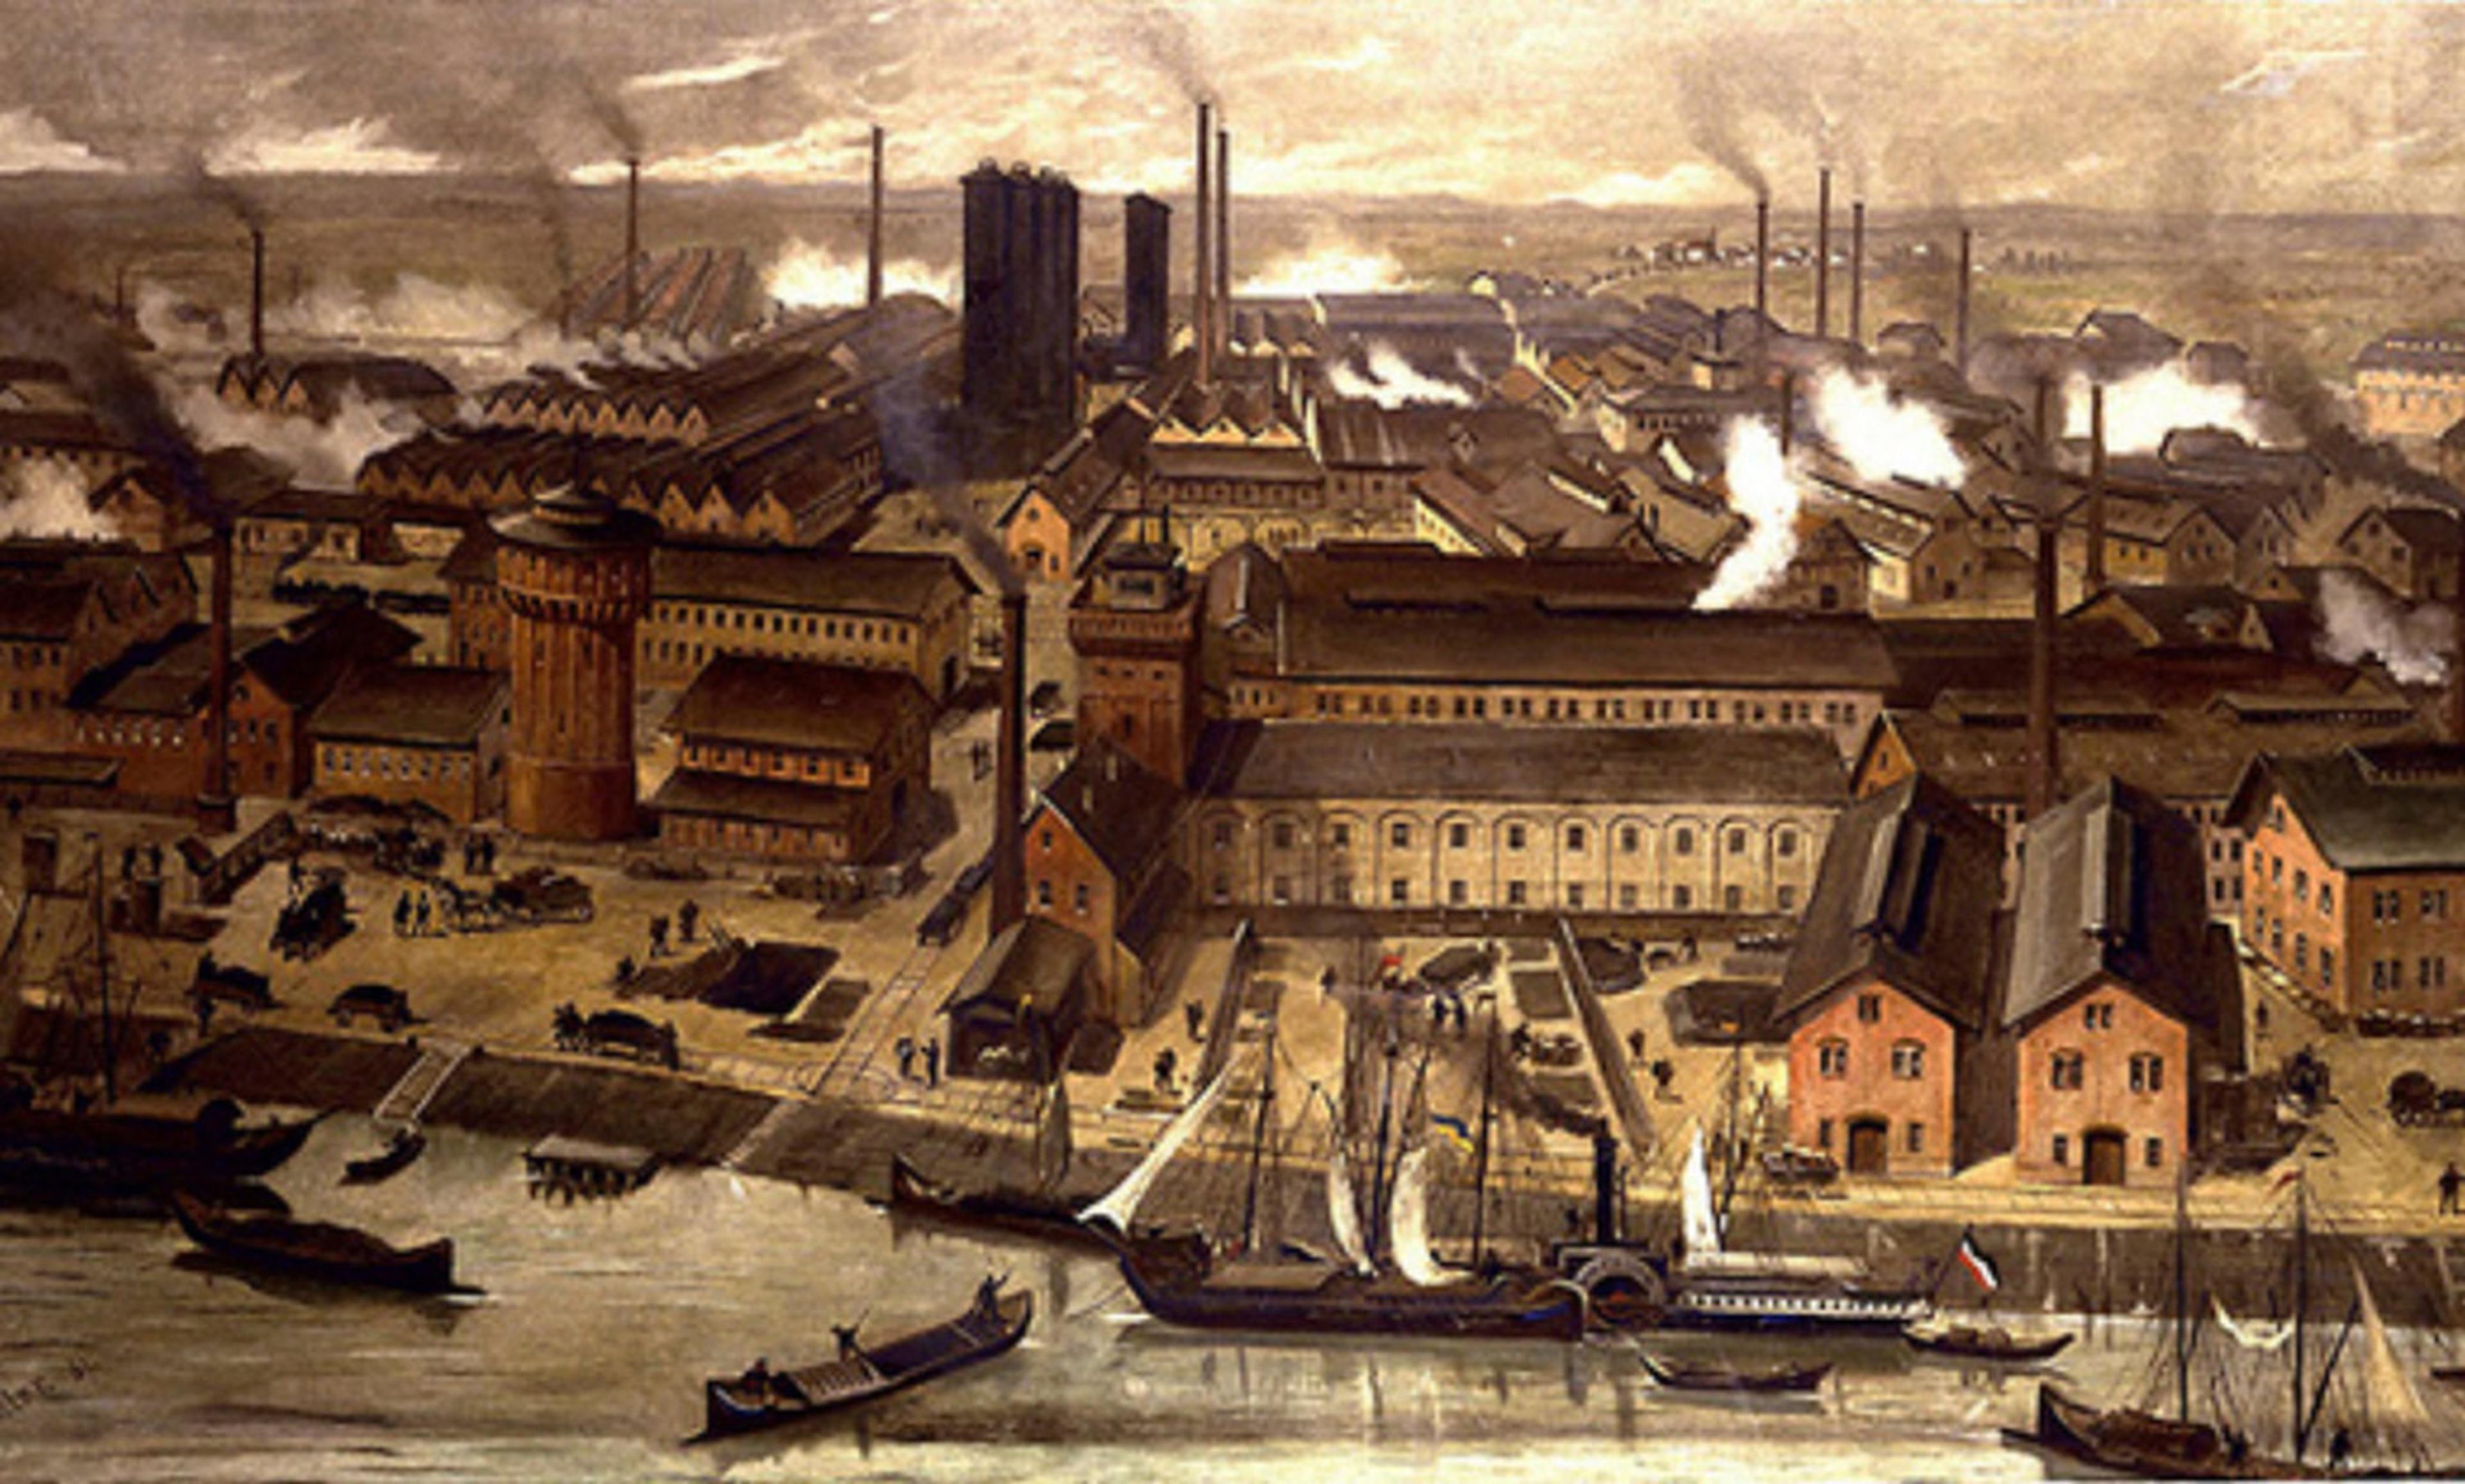 <p>The BASF factory at Ludwigshafen, Germany, pictured on a postcard in 1881. <em>Courtesy Wikipedia</em></p>